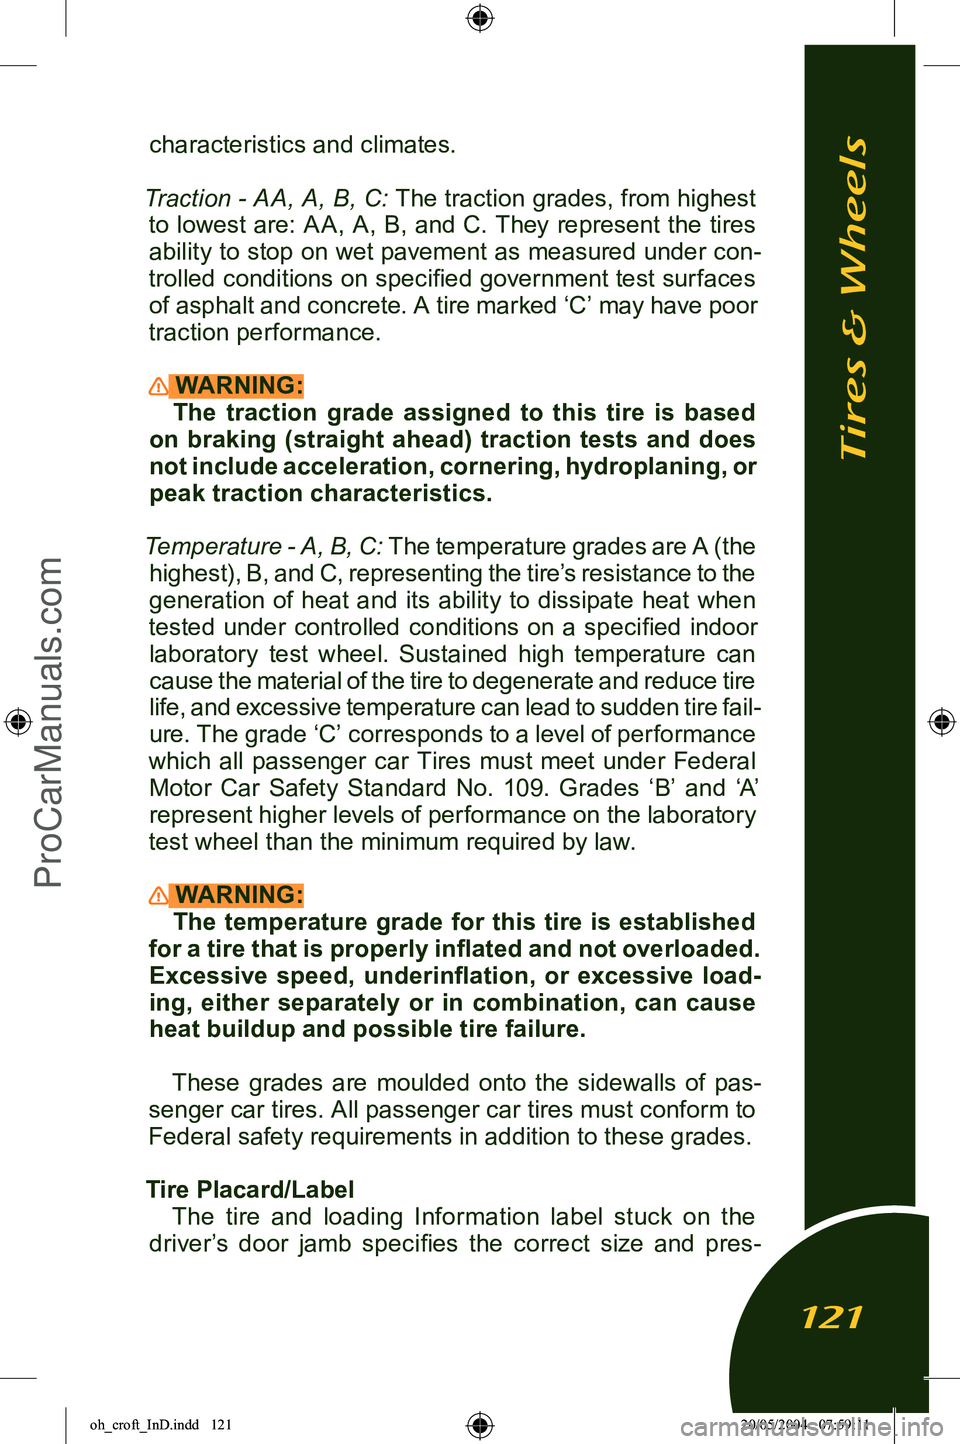 LOTUS ELISE 2005  Owners Manual 
characteristics and climates.
Traction - AA, A, B, C: The traction grades, from highest  to lowest are: A A, A, B, and C. They represent the tires ability to stop on wet pavement as measured under co